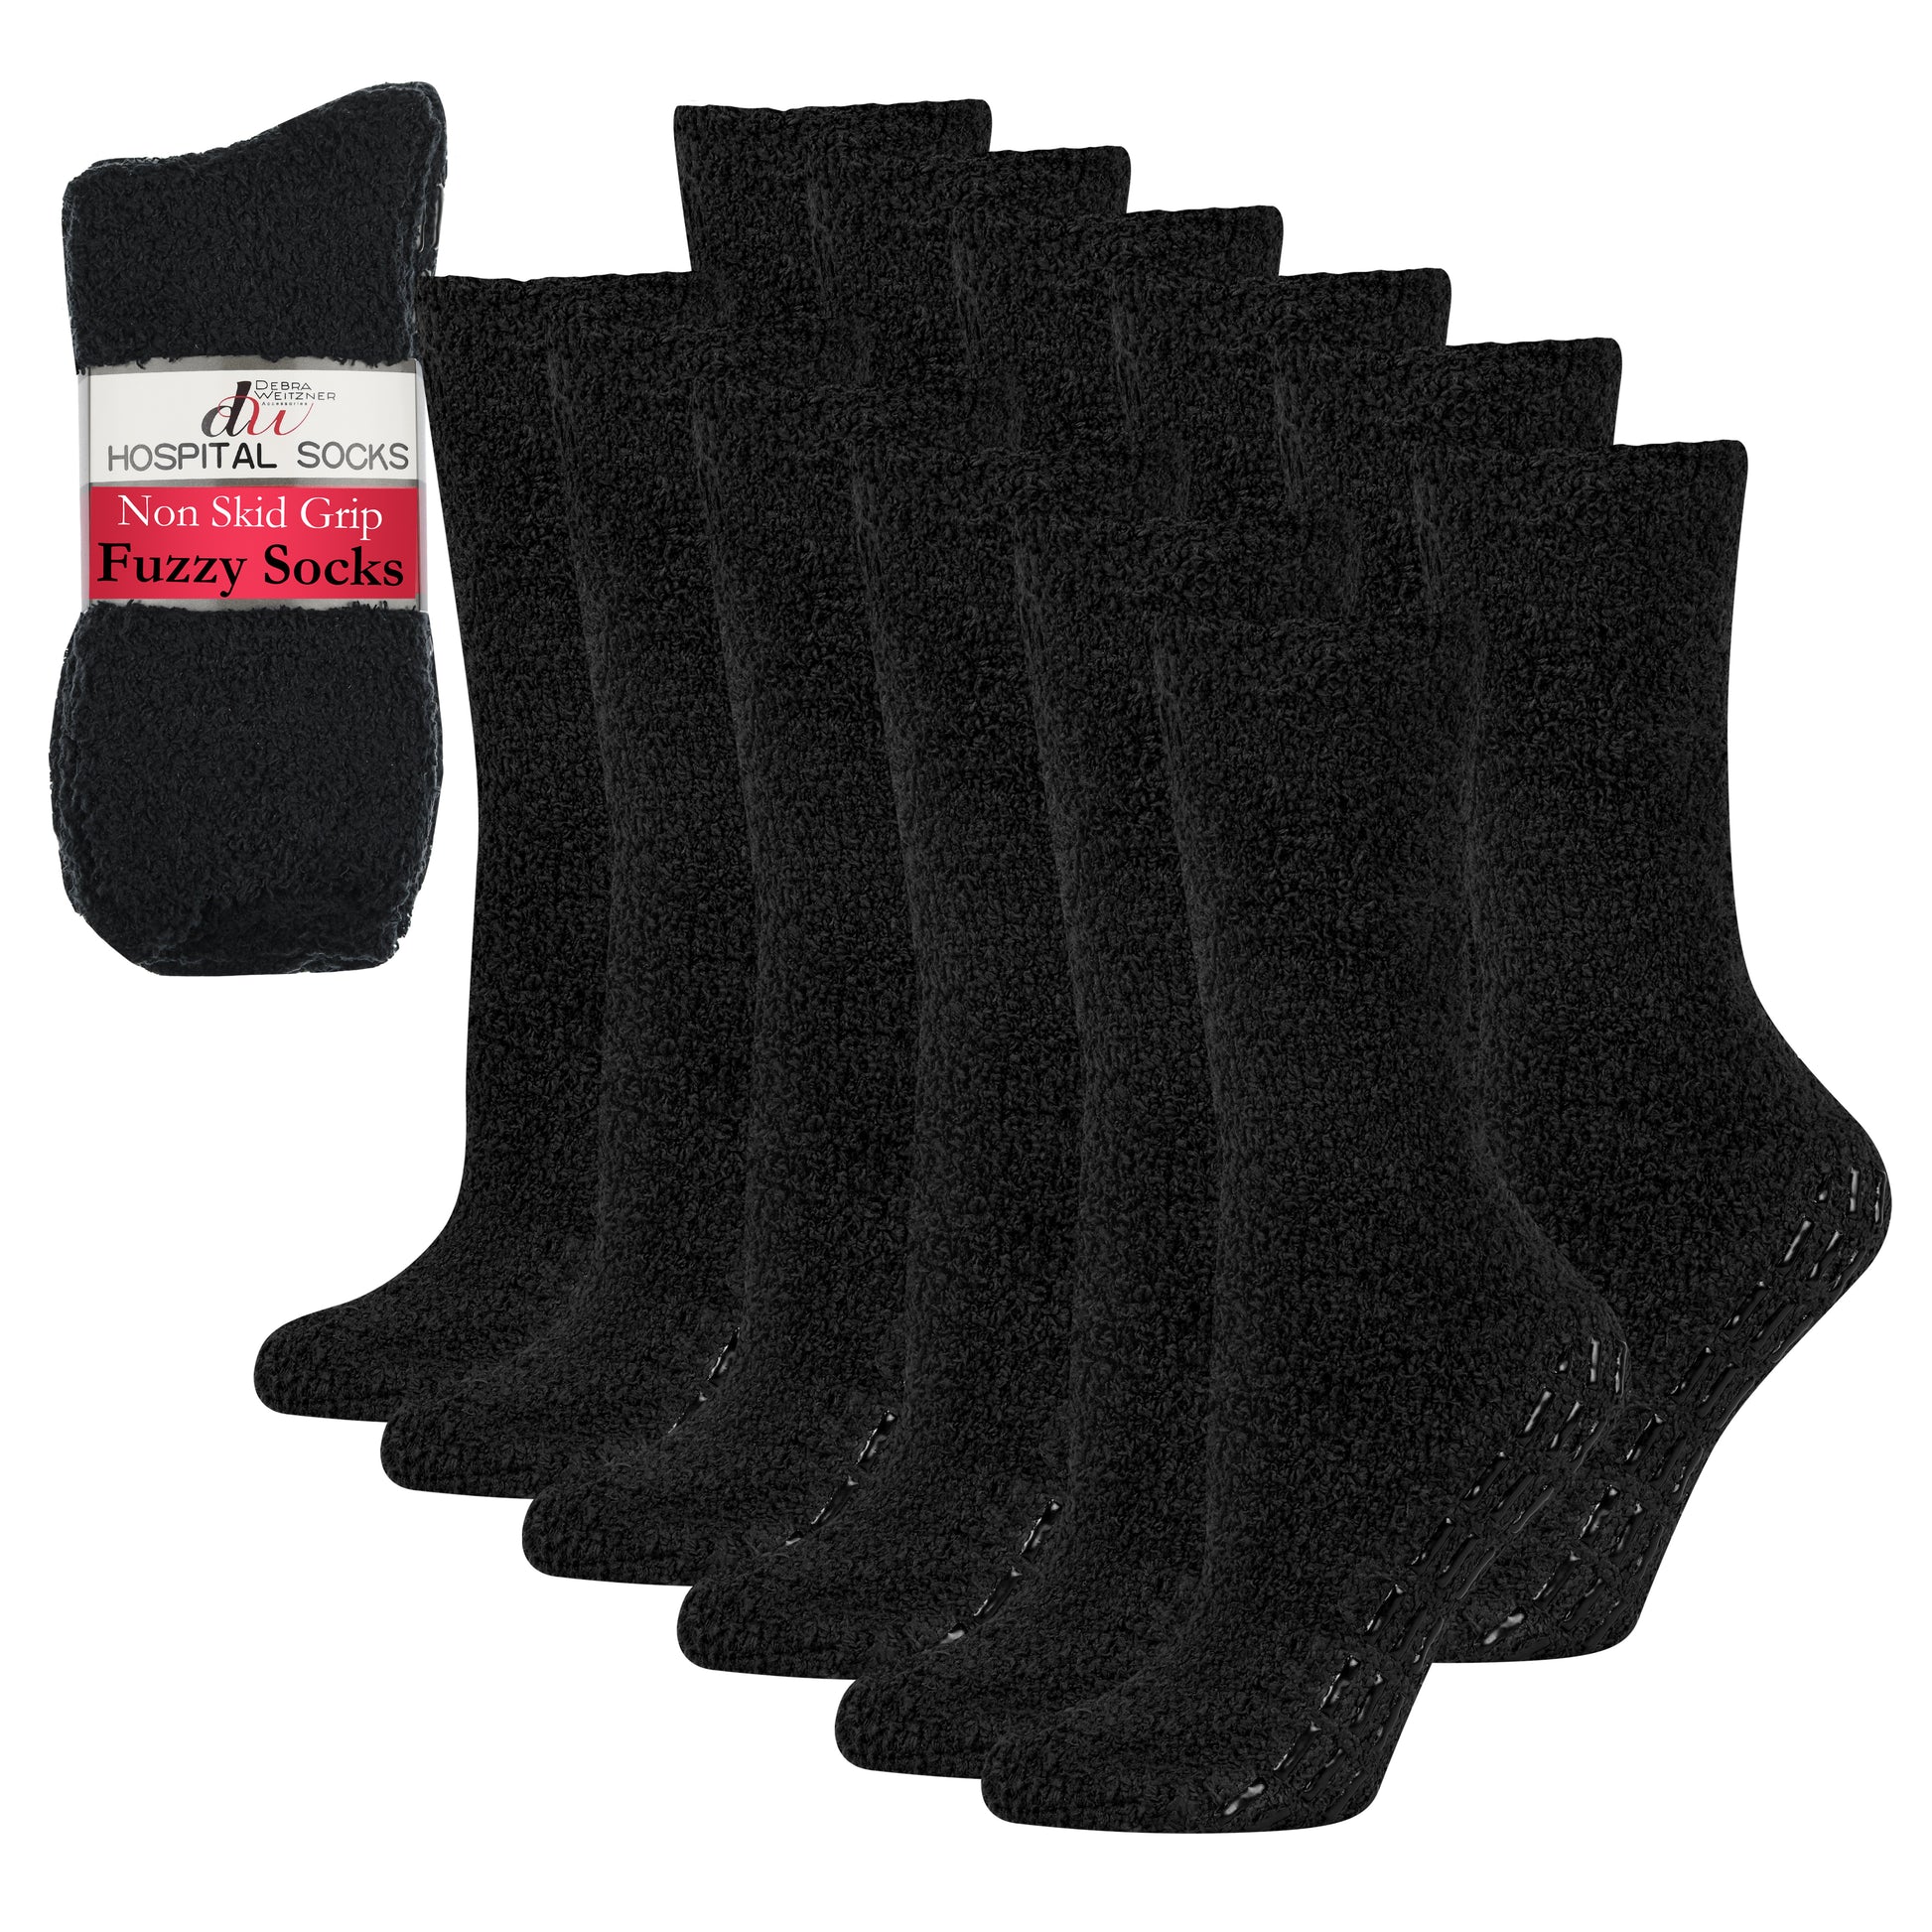  Debra Weitzner 6 Pairs Warm Fuzzy Socks for Kids with Grippers  - Non Skid Slipper Socks for Toddlers - Two Tone 12-24 Months